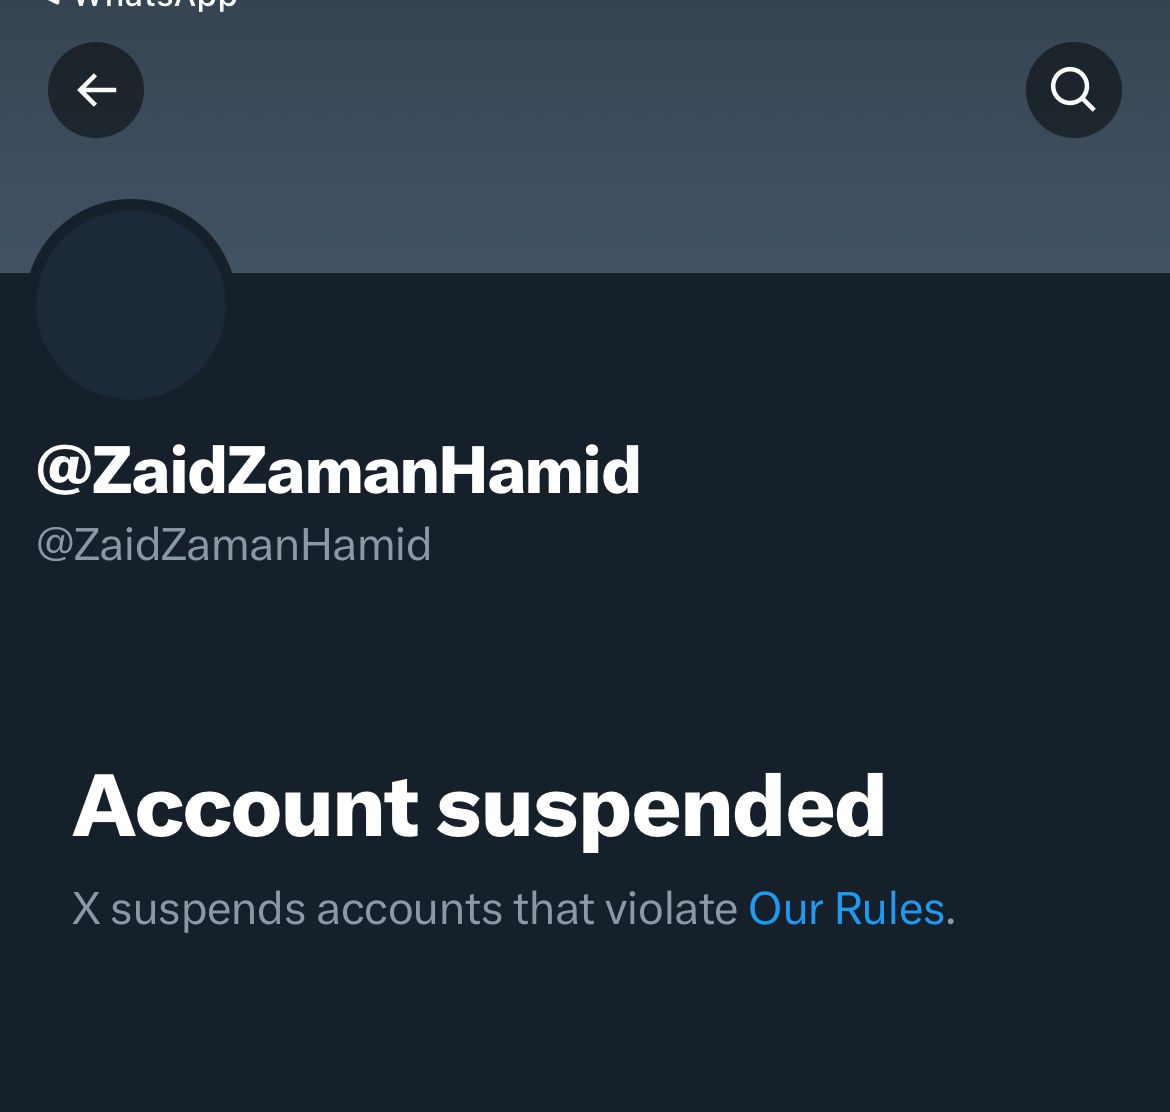 Please reinstate this @ZaidZamanHamid account promptly, as it was suspended without legitimate cause, merely due to a barrage of false reports driven by a fabricated narrative. We trust that Elon Musk, who has advocated for the principles of free speech, will honour his